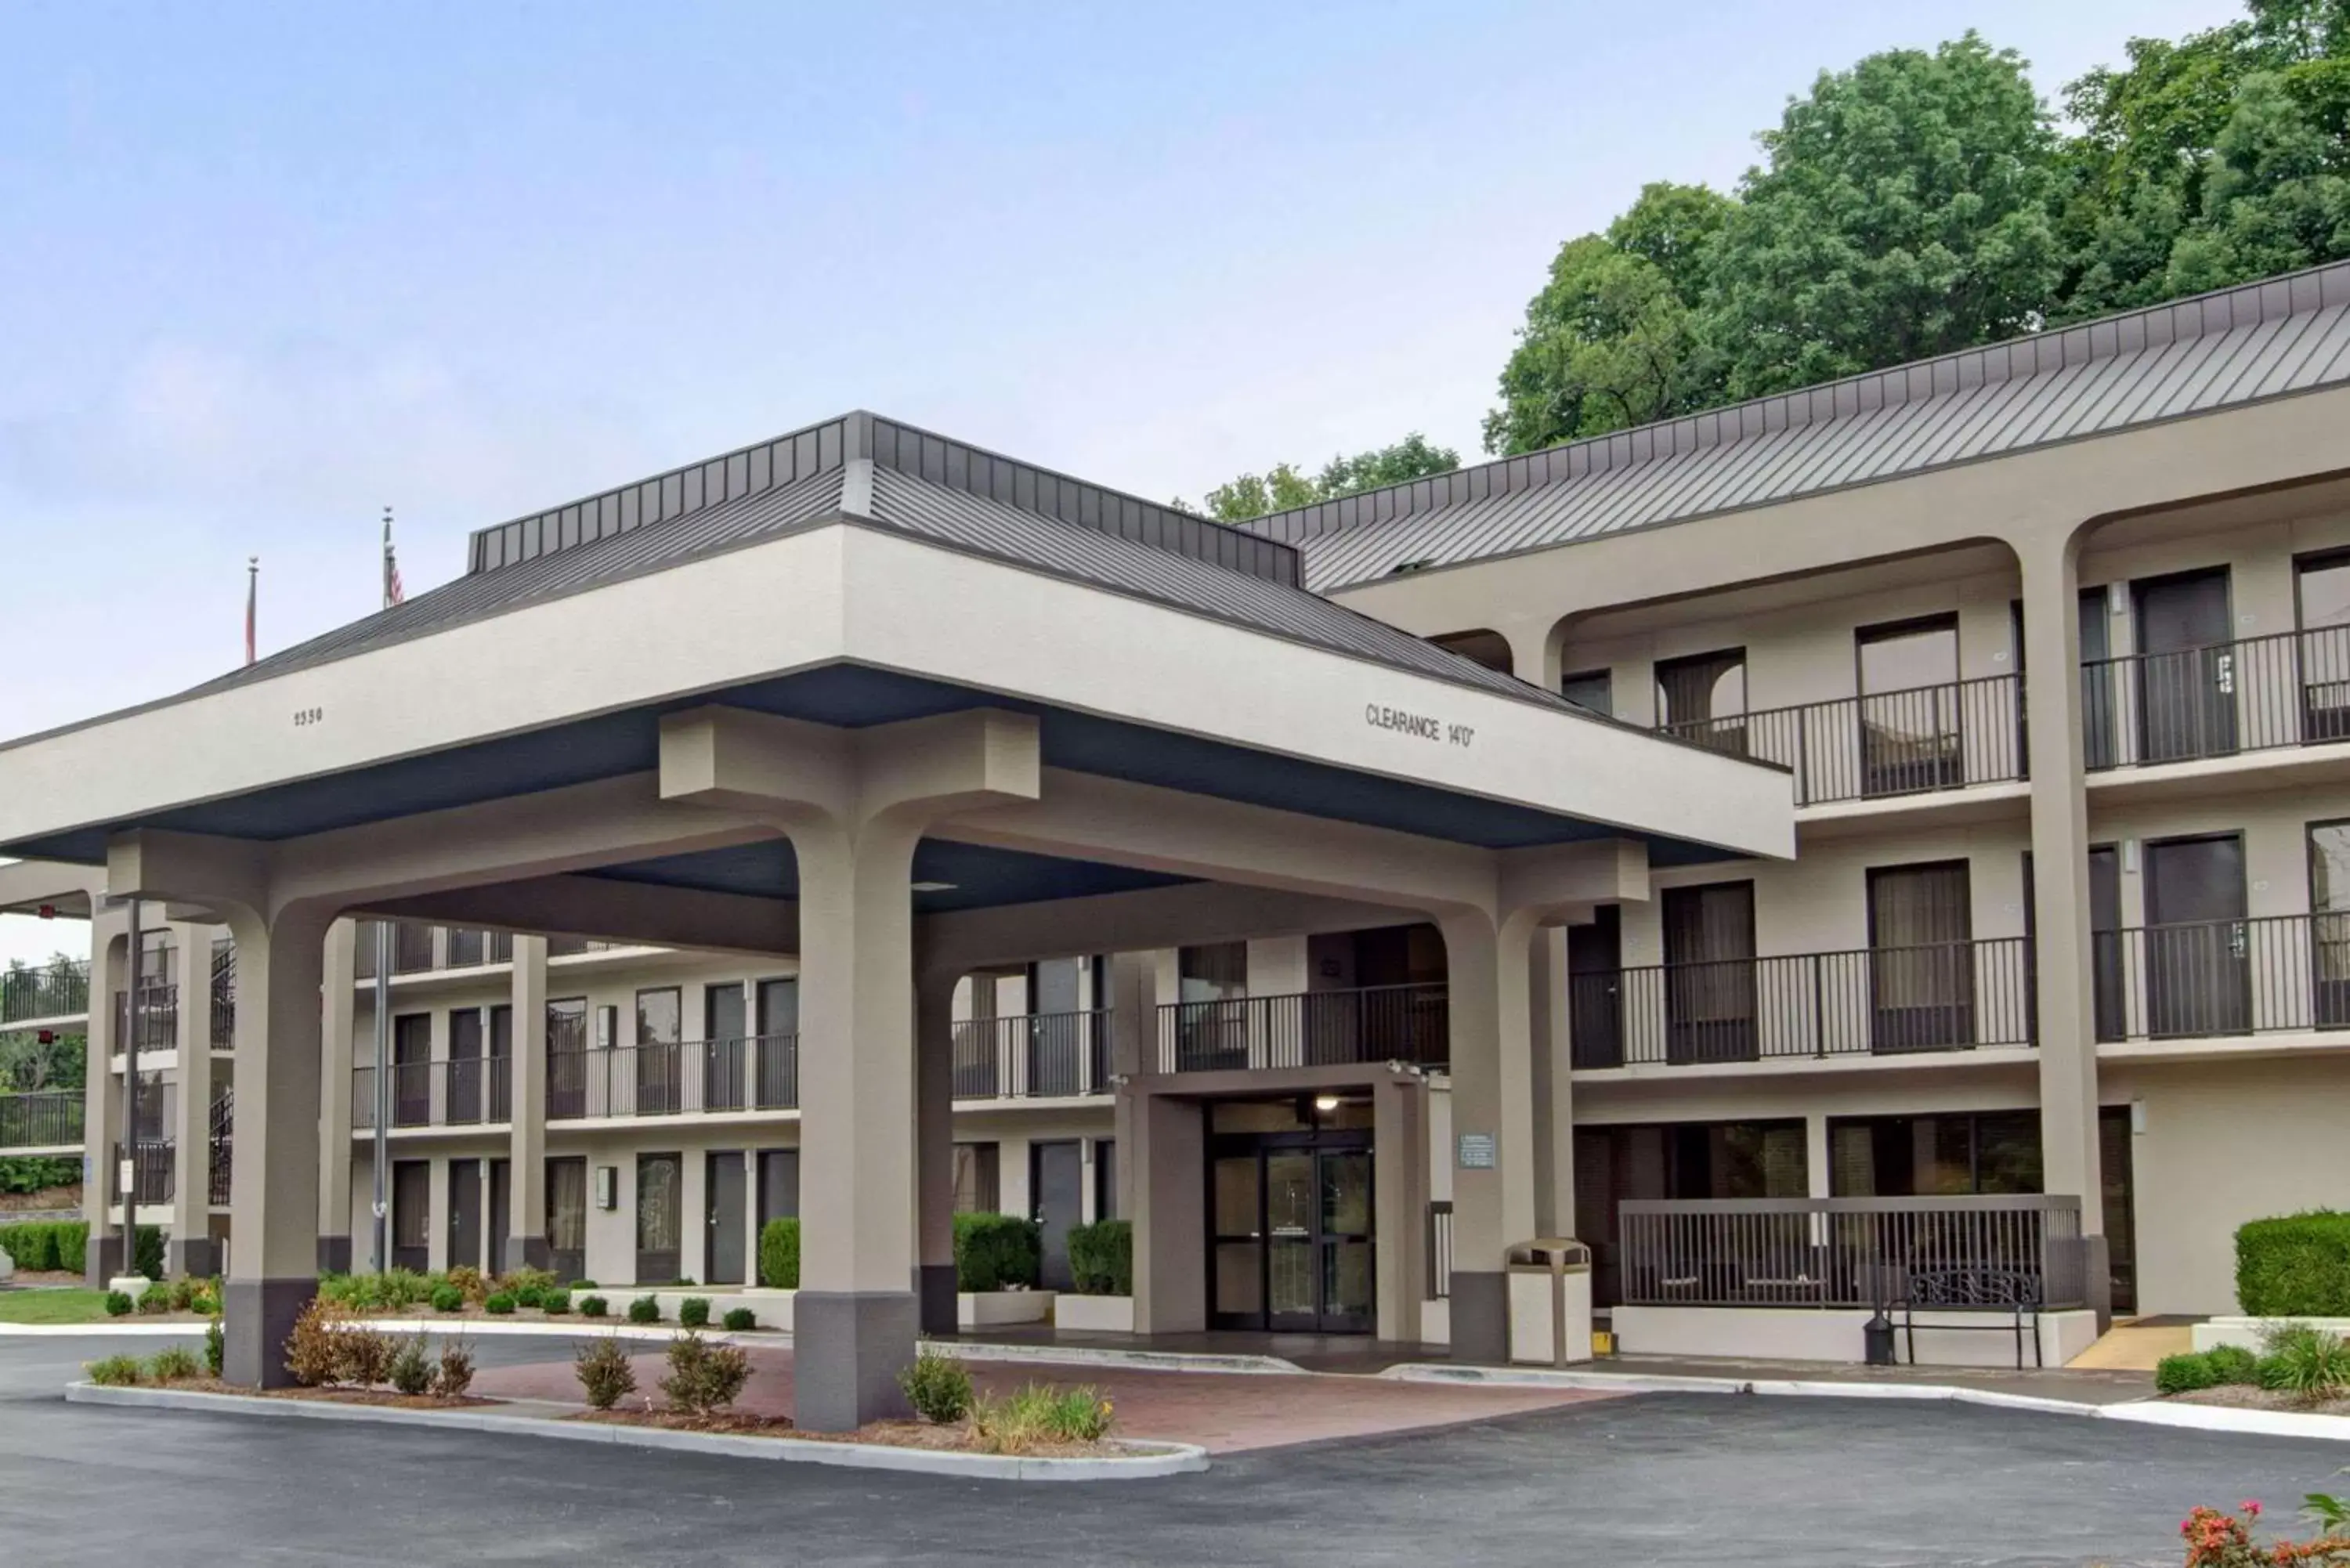 Property Building in Baymont by Wyndham Nashville Airport